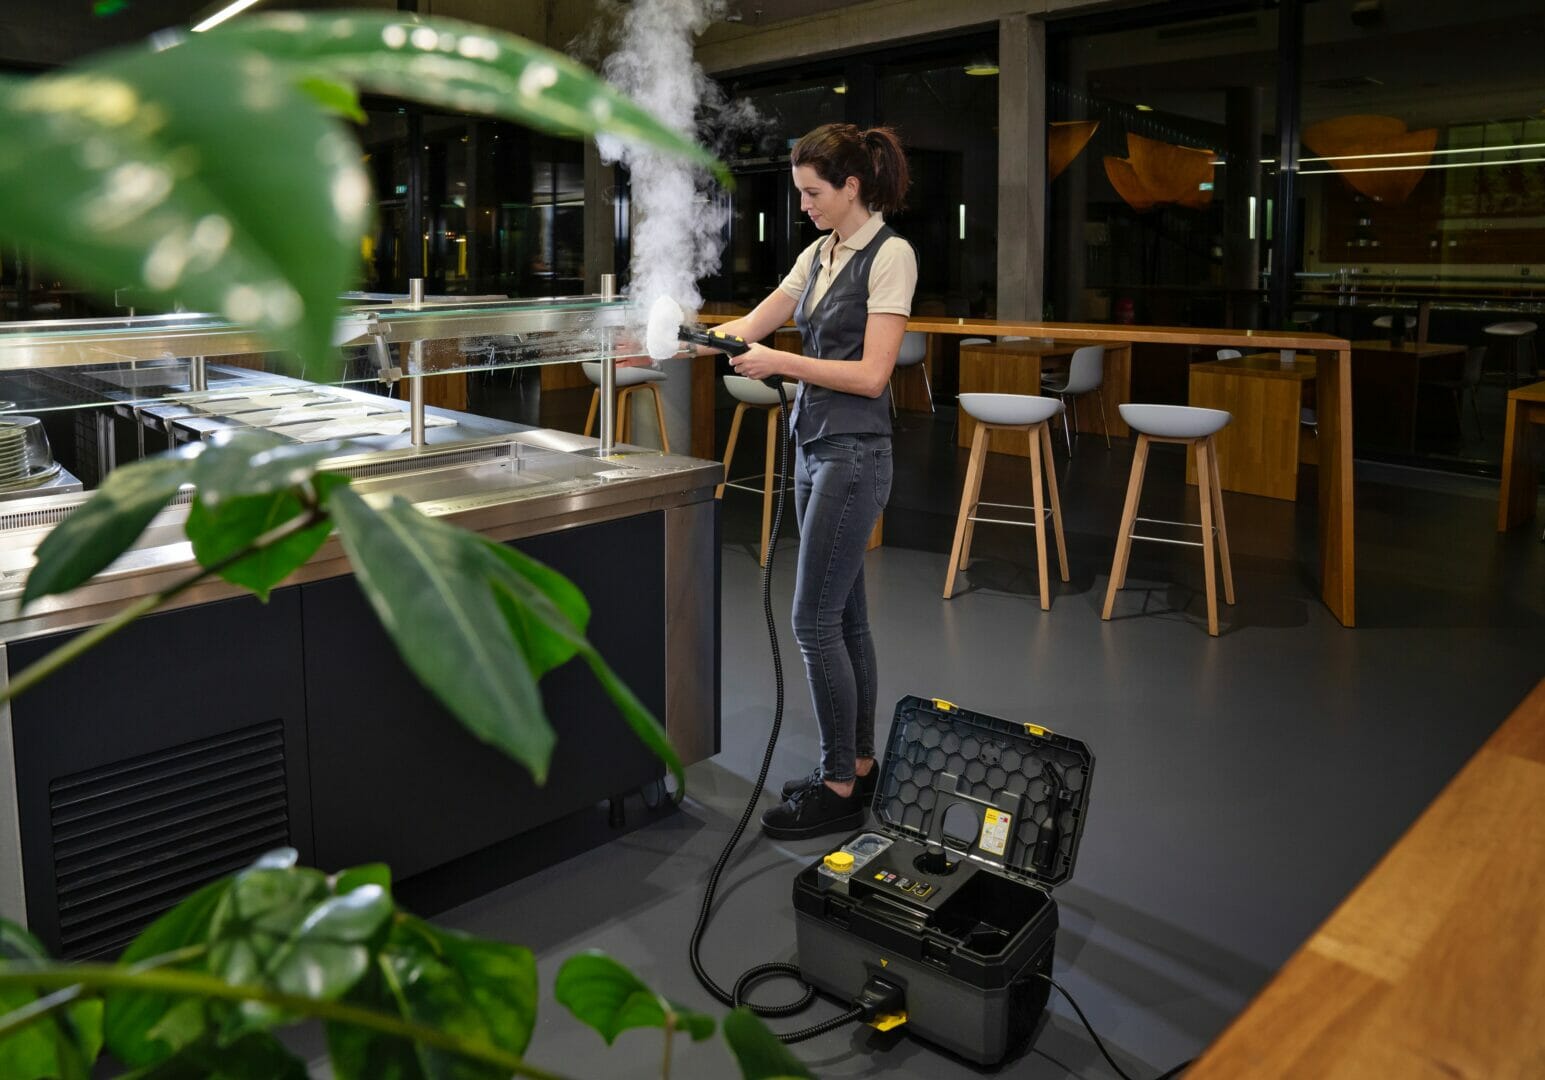 Kärcher UK launches SG 4/2 Classic steam cleaner